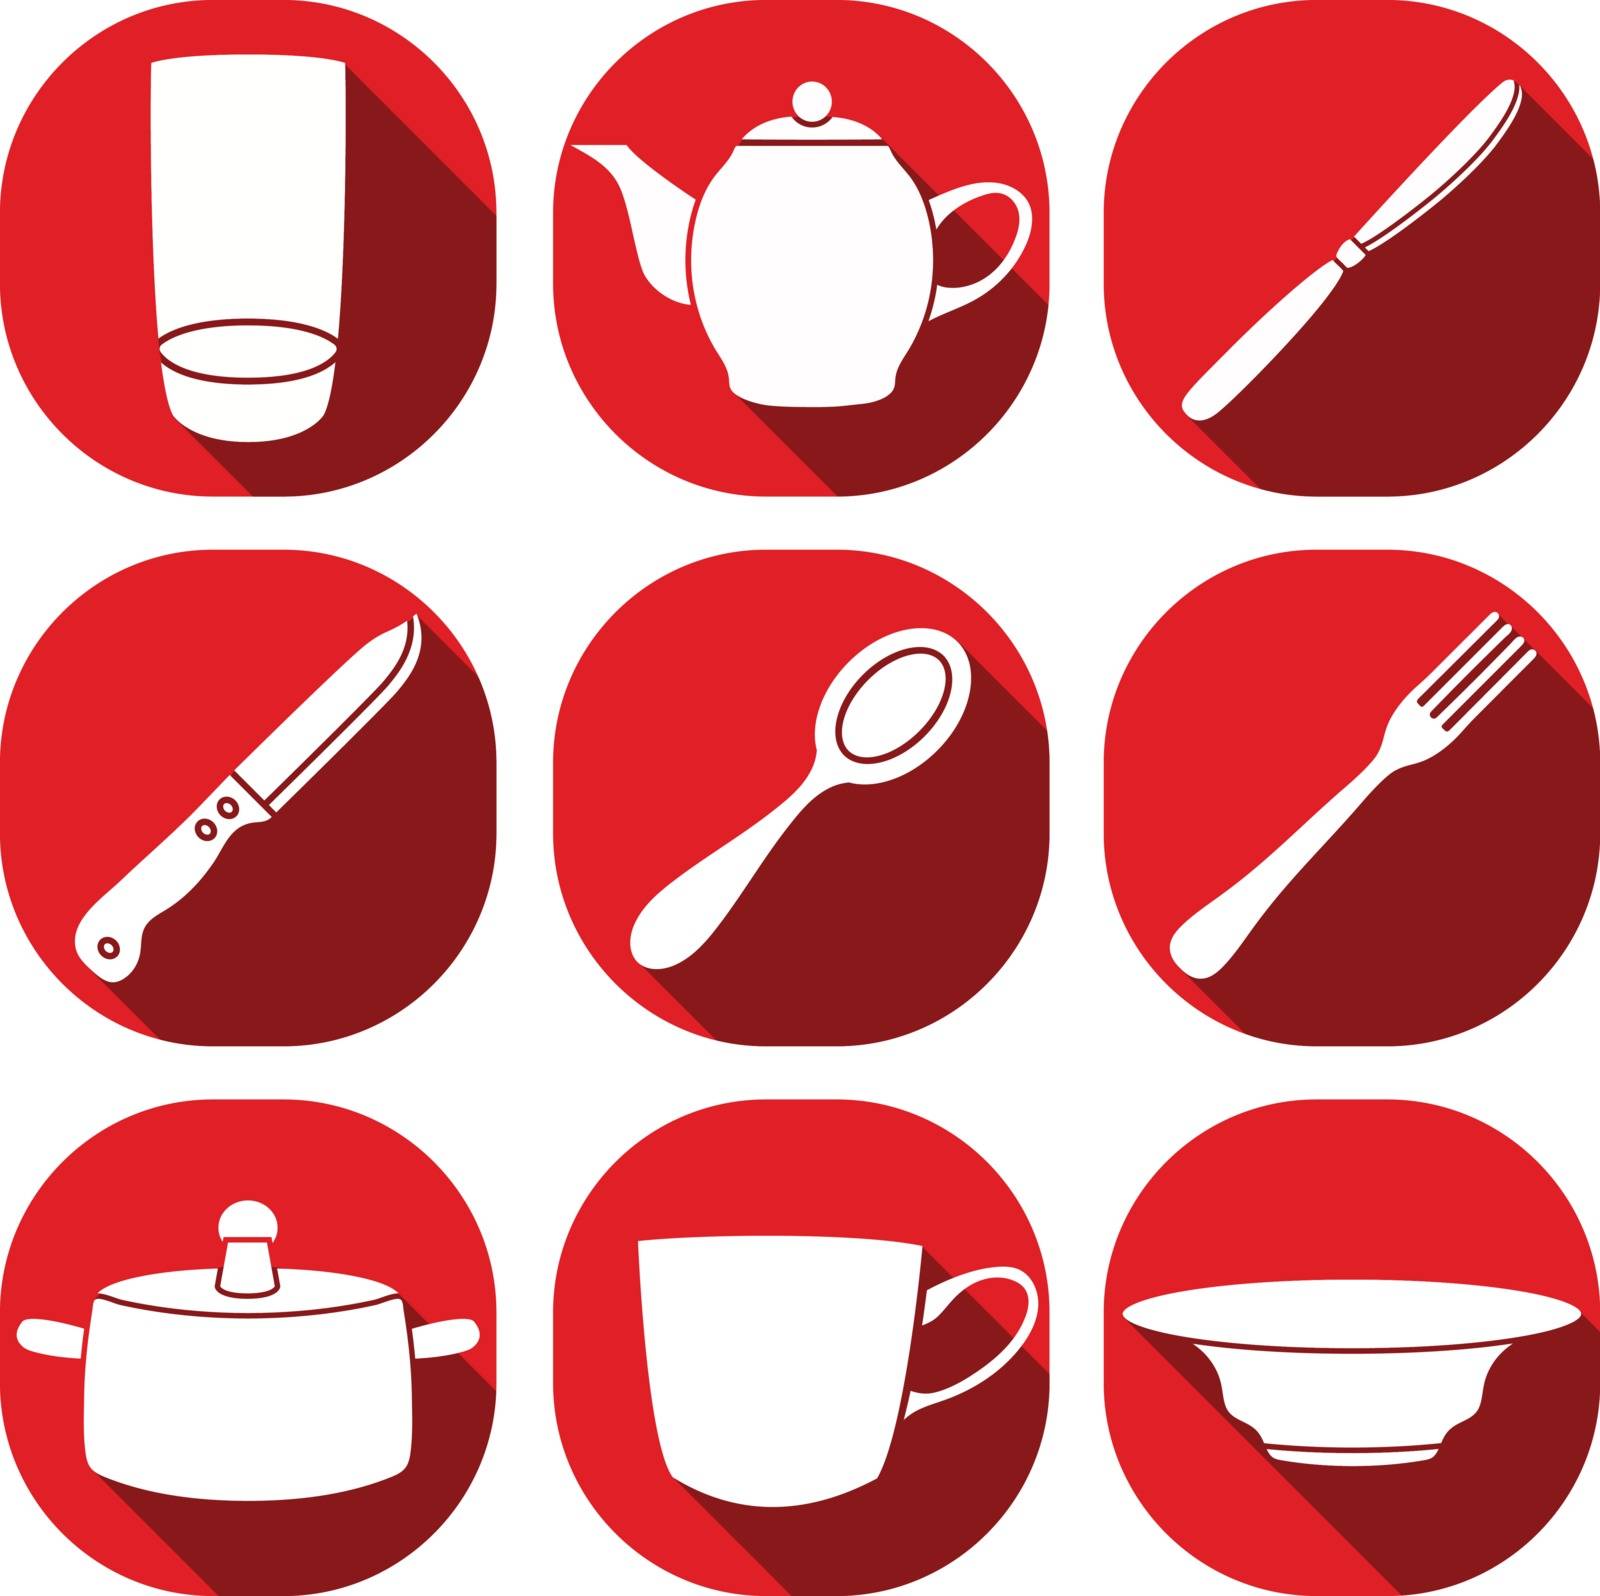 Here it is shown a set of 9 icons of kitchen appliances. 
They are painted in a flat style. This shows a glass maker, 
а table knife, а kitchen knife, а spoon, а fork, a saucepan, 
а cup and a plate on a red background.